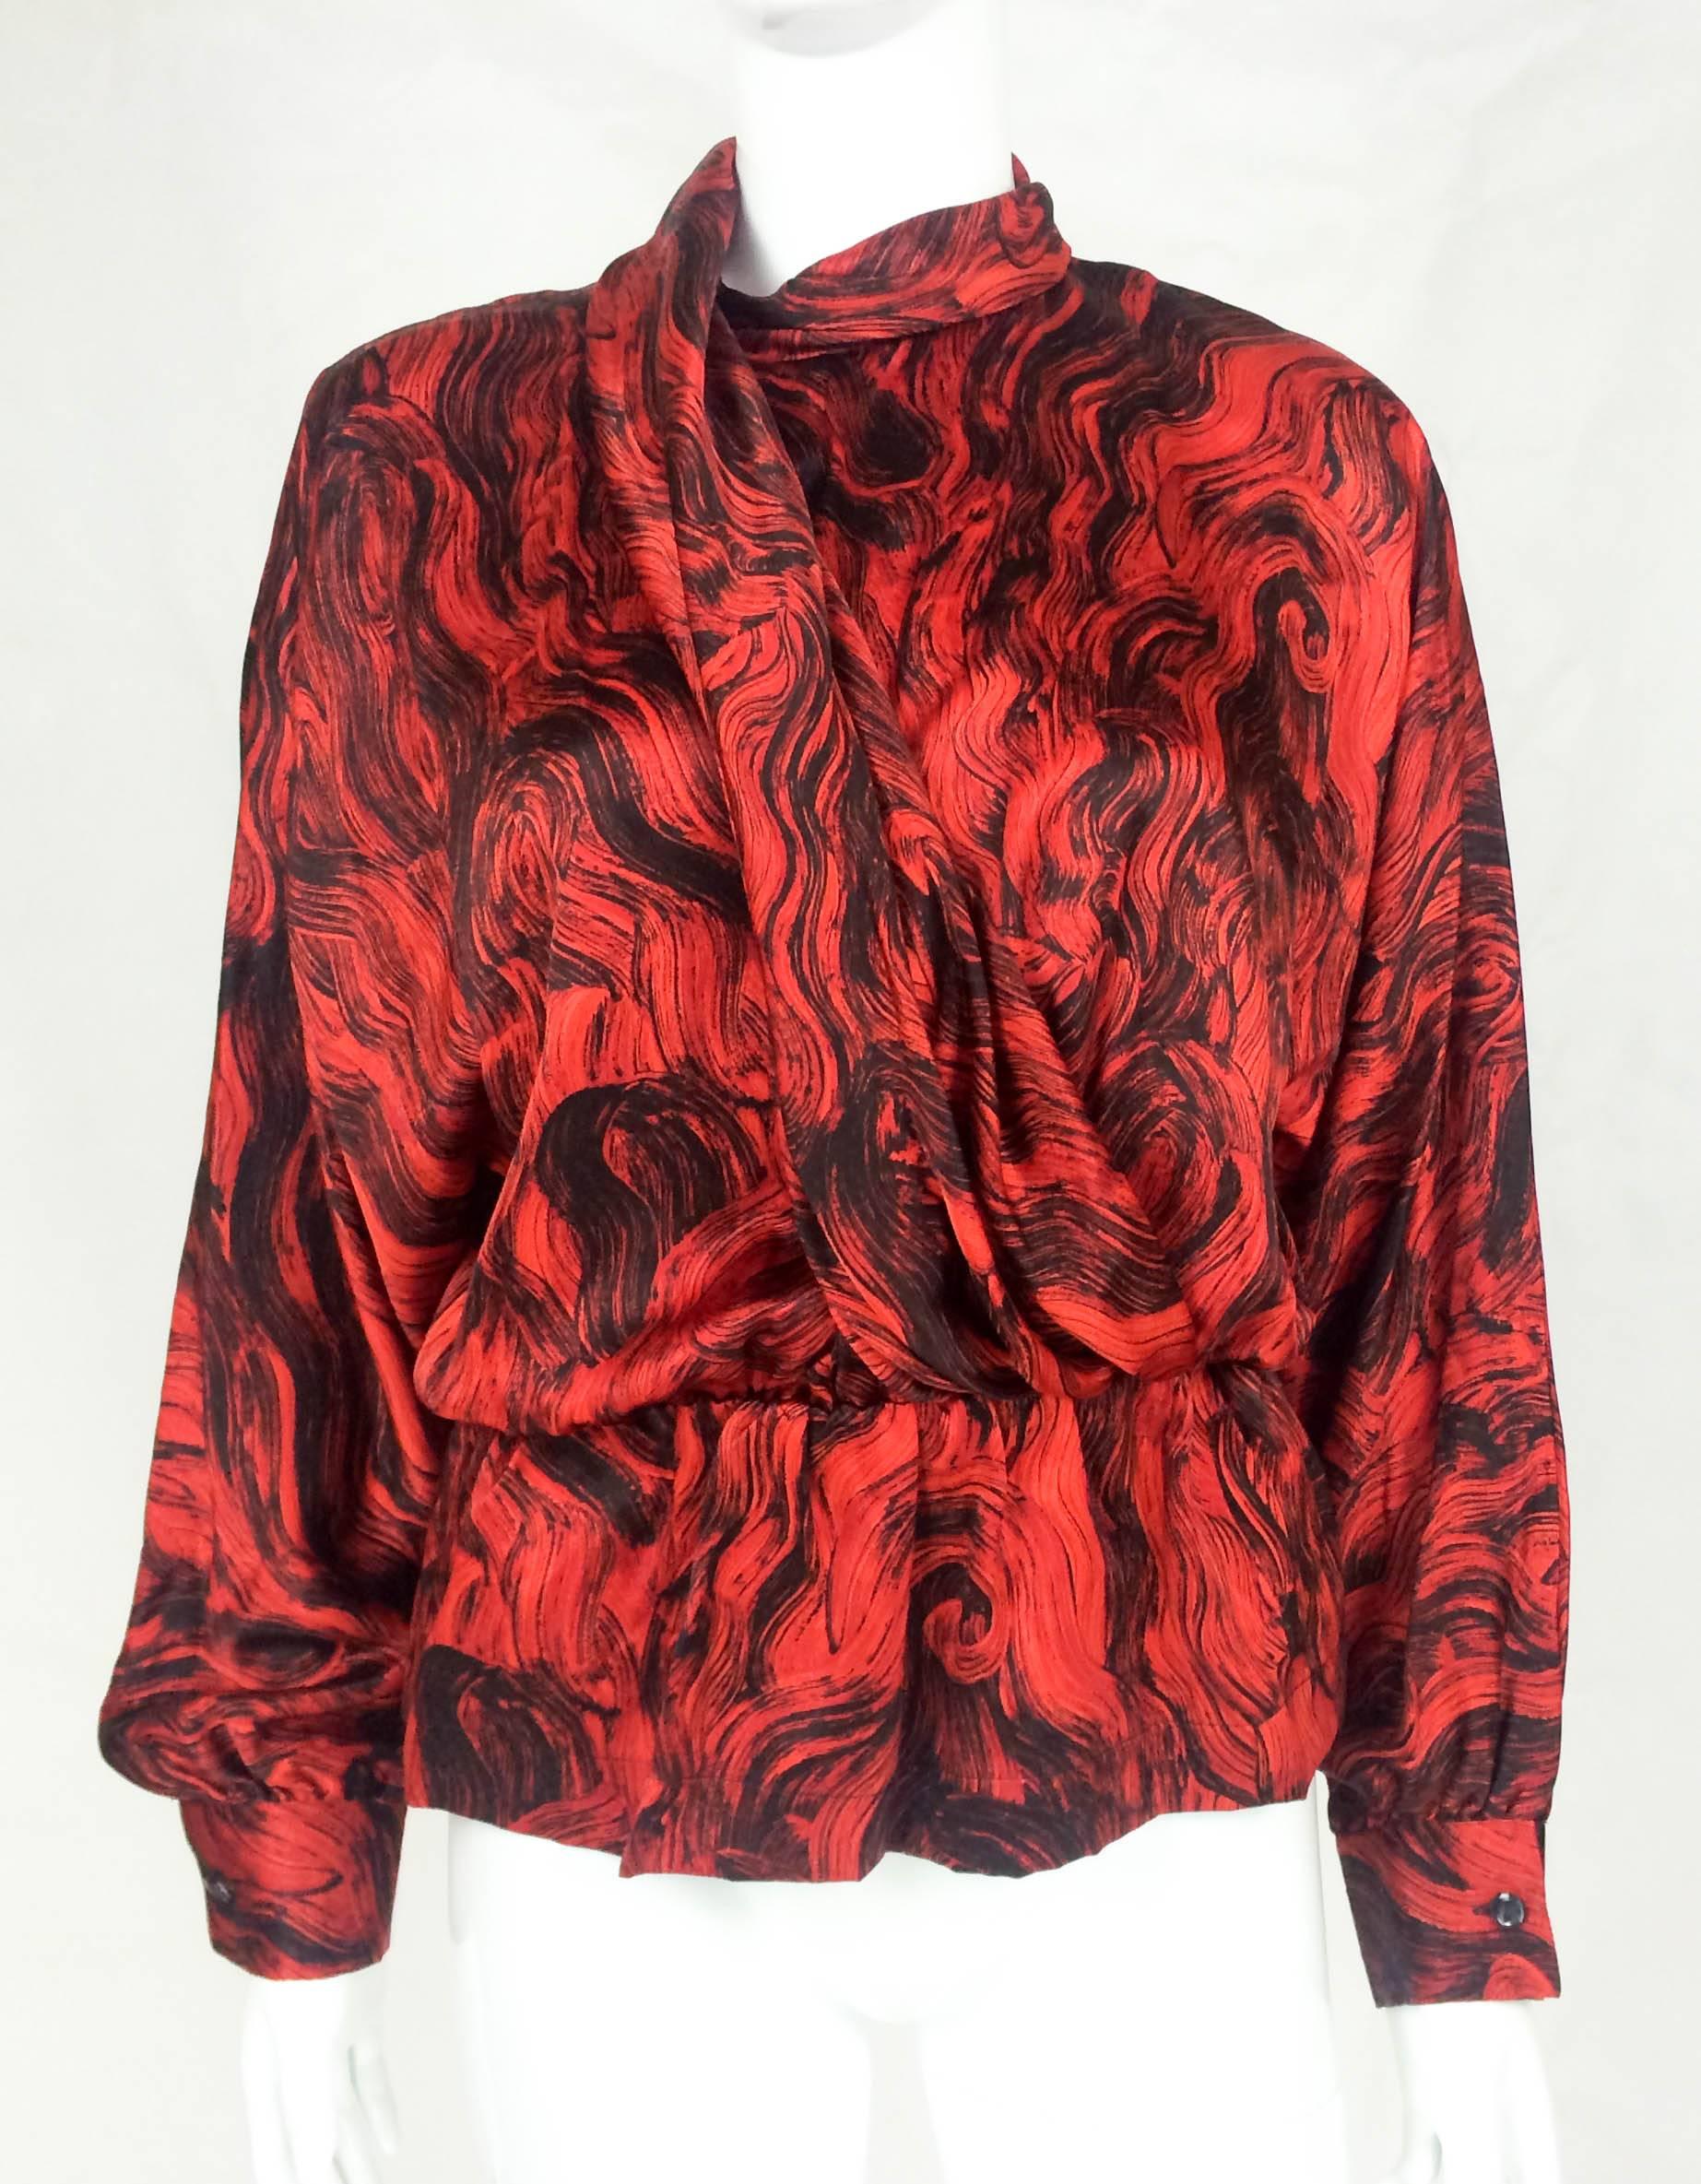 Pierre Cardin Silk Blouse - 1980s In Excellent Condition In London, Chelsea